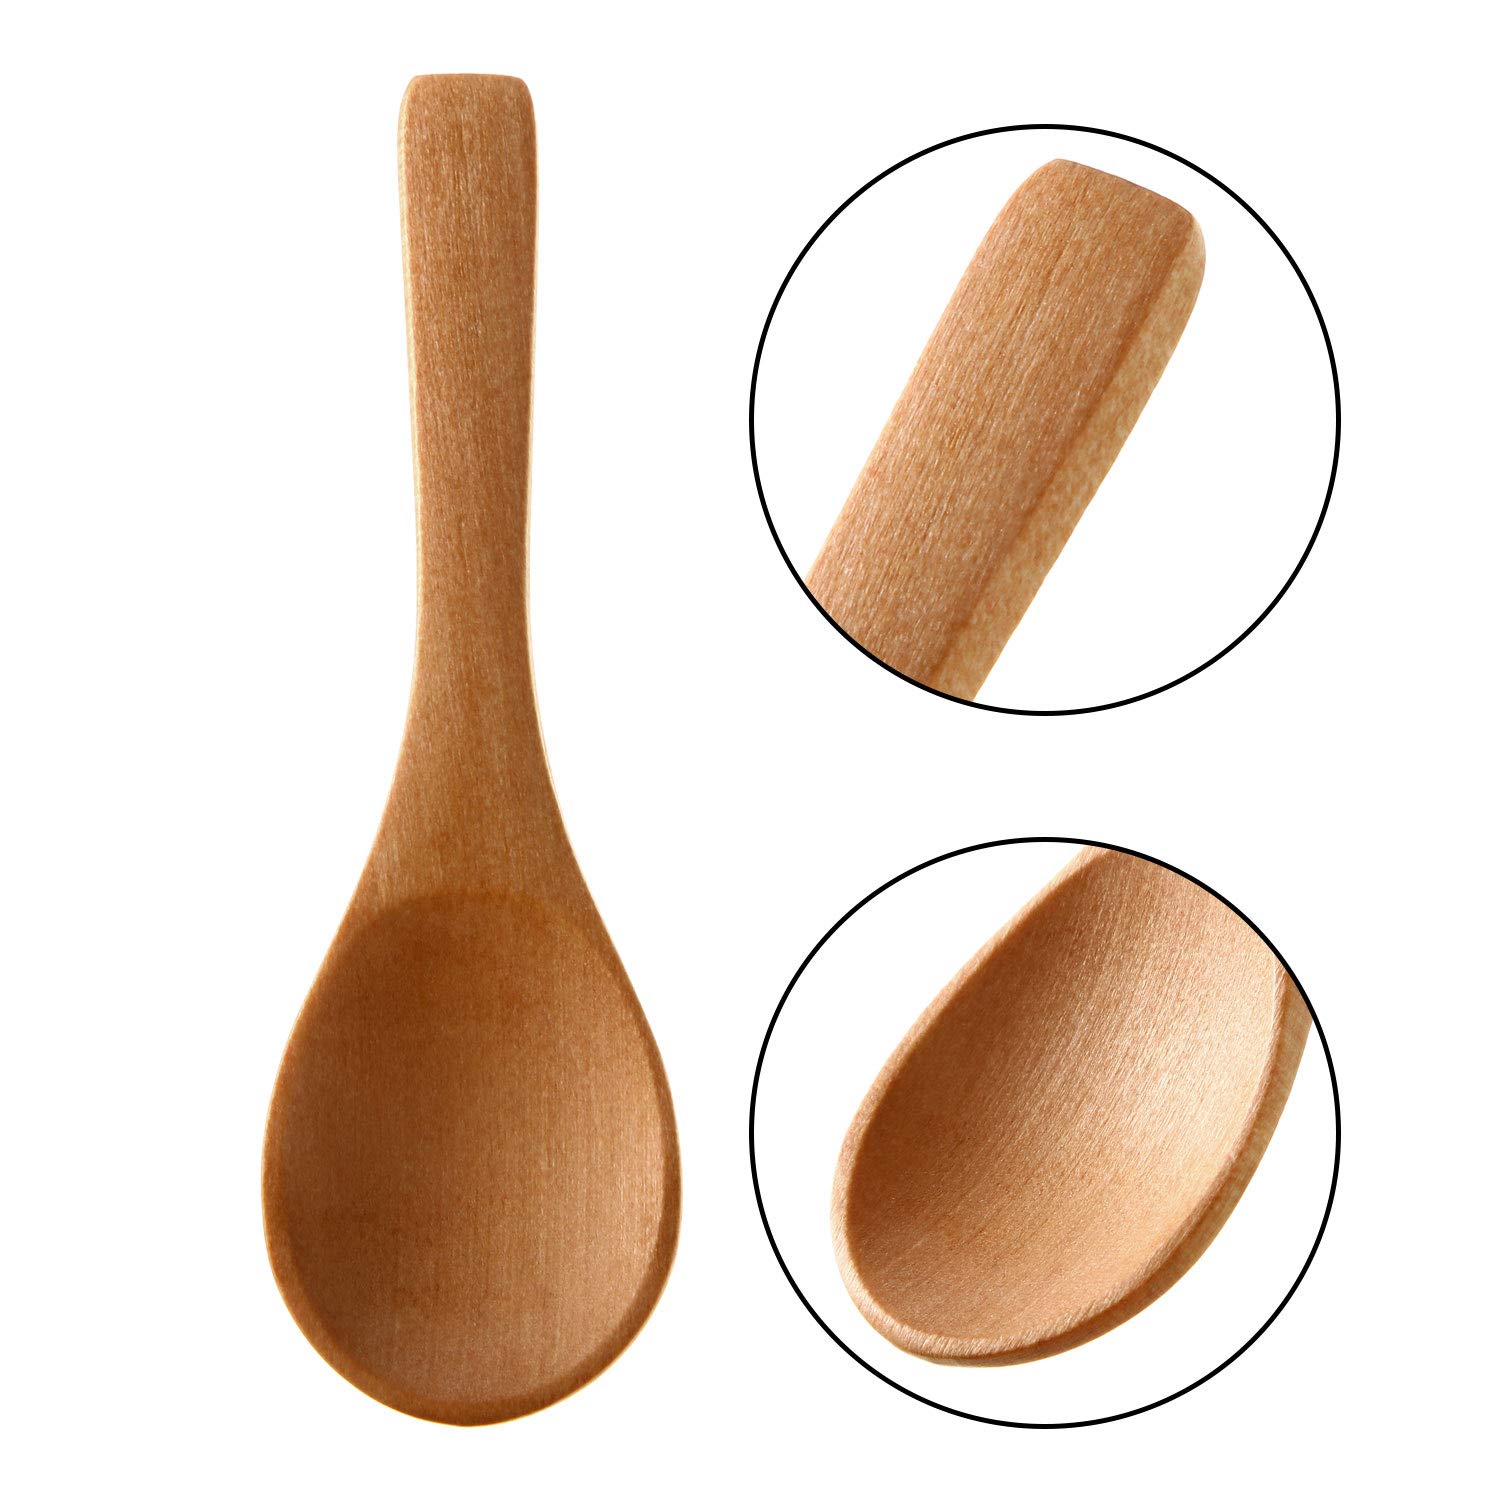 Boao 50 Pieces Small Wooden Spoons, 3.5'' L, Mini Nature Spoons Wood Honey Teaspoon Cooking Condiments Spoons for Kitchen Seasoning Jar Coffee Tea Sugar